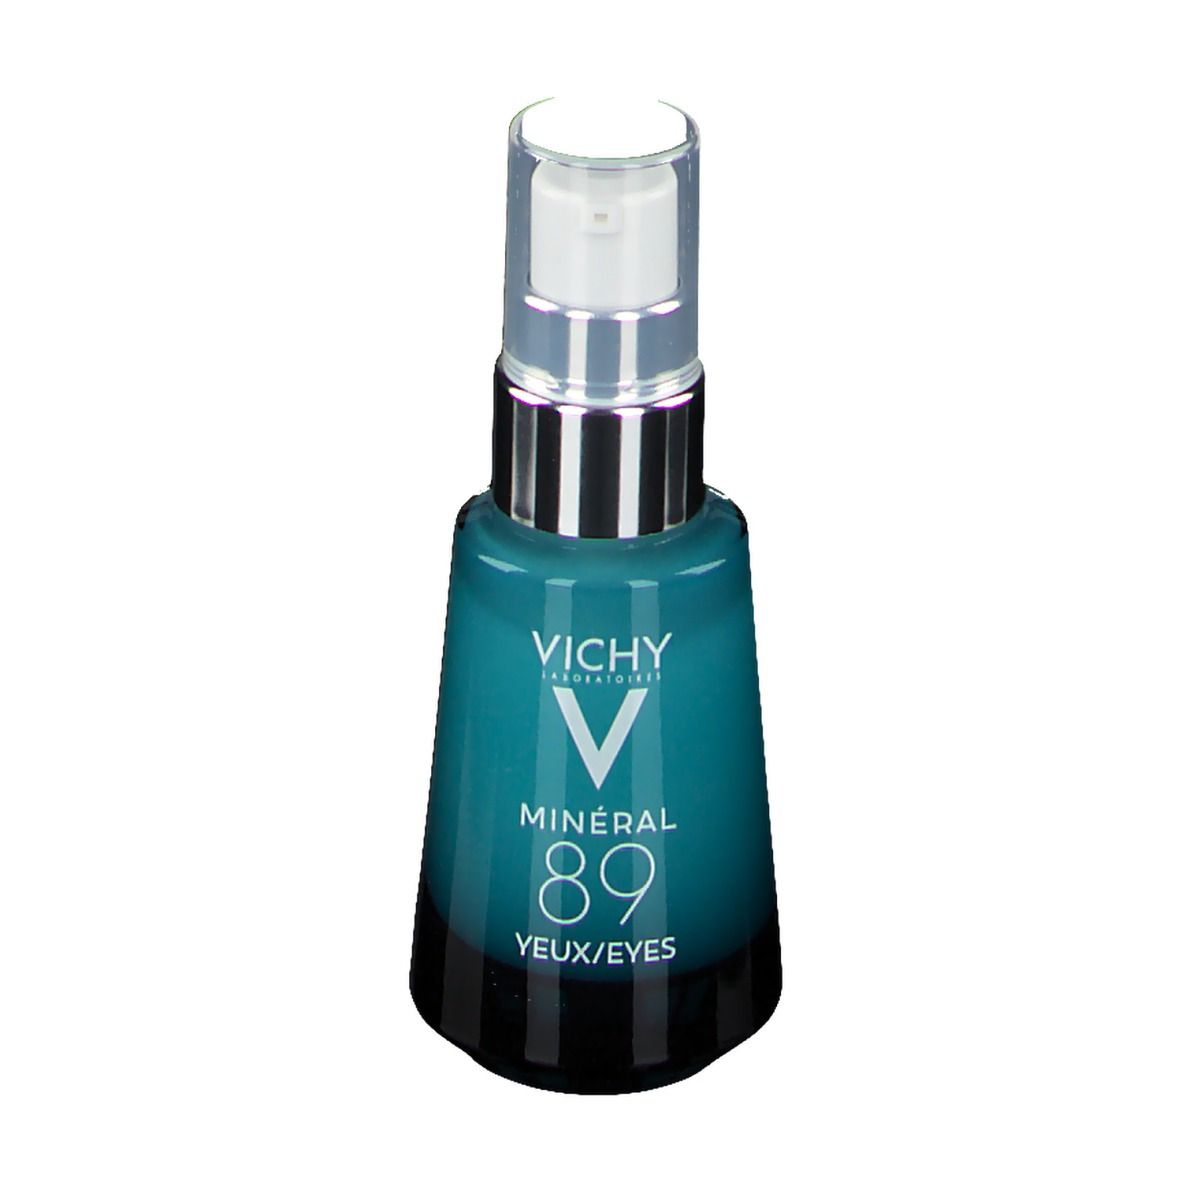 Vichy MINERAL 89 Yeux